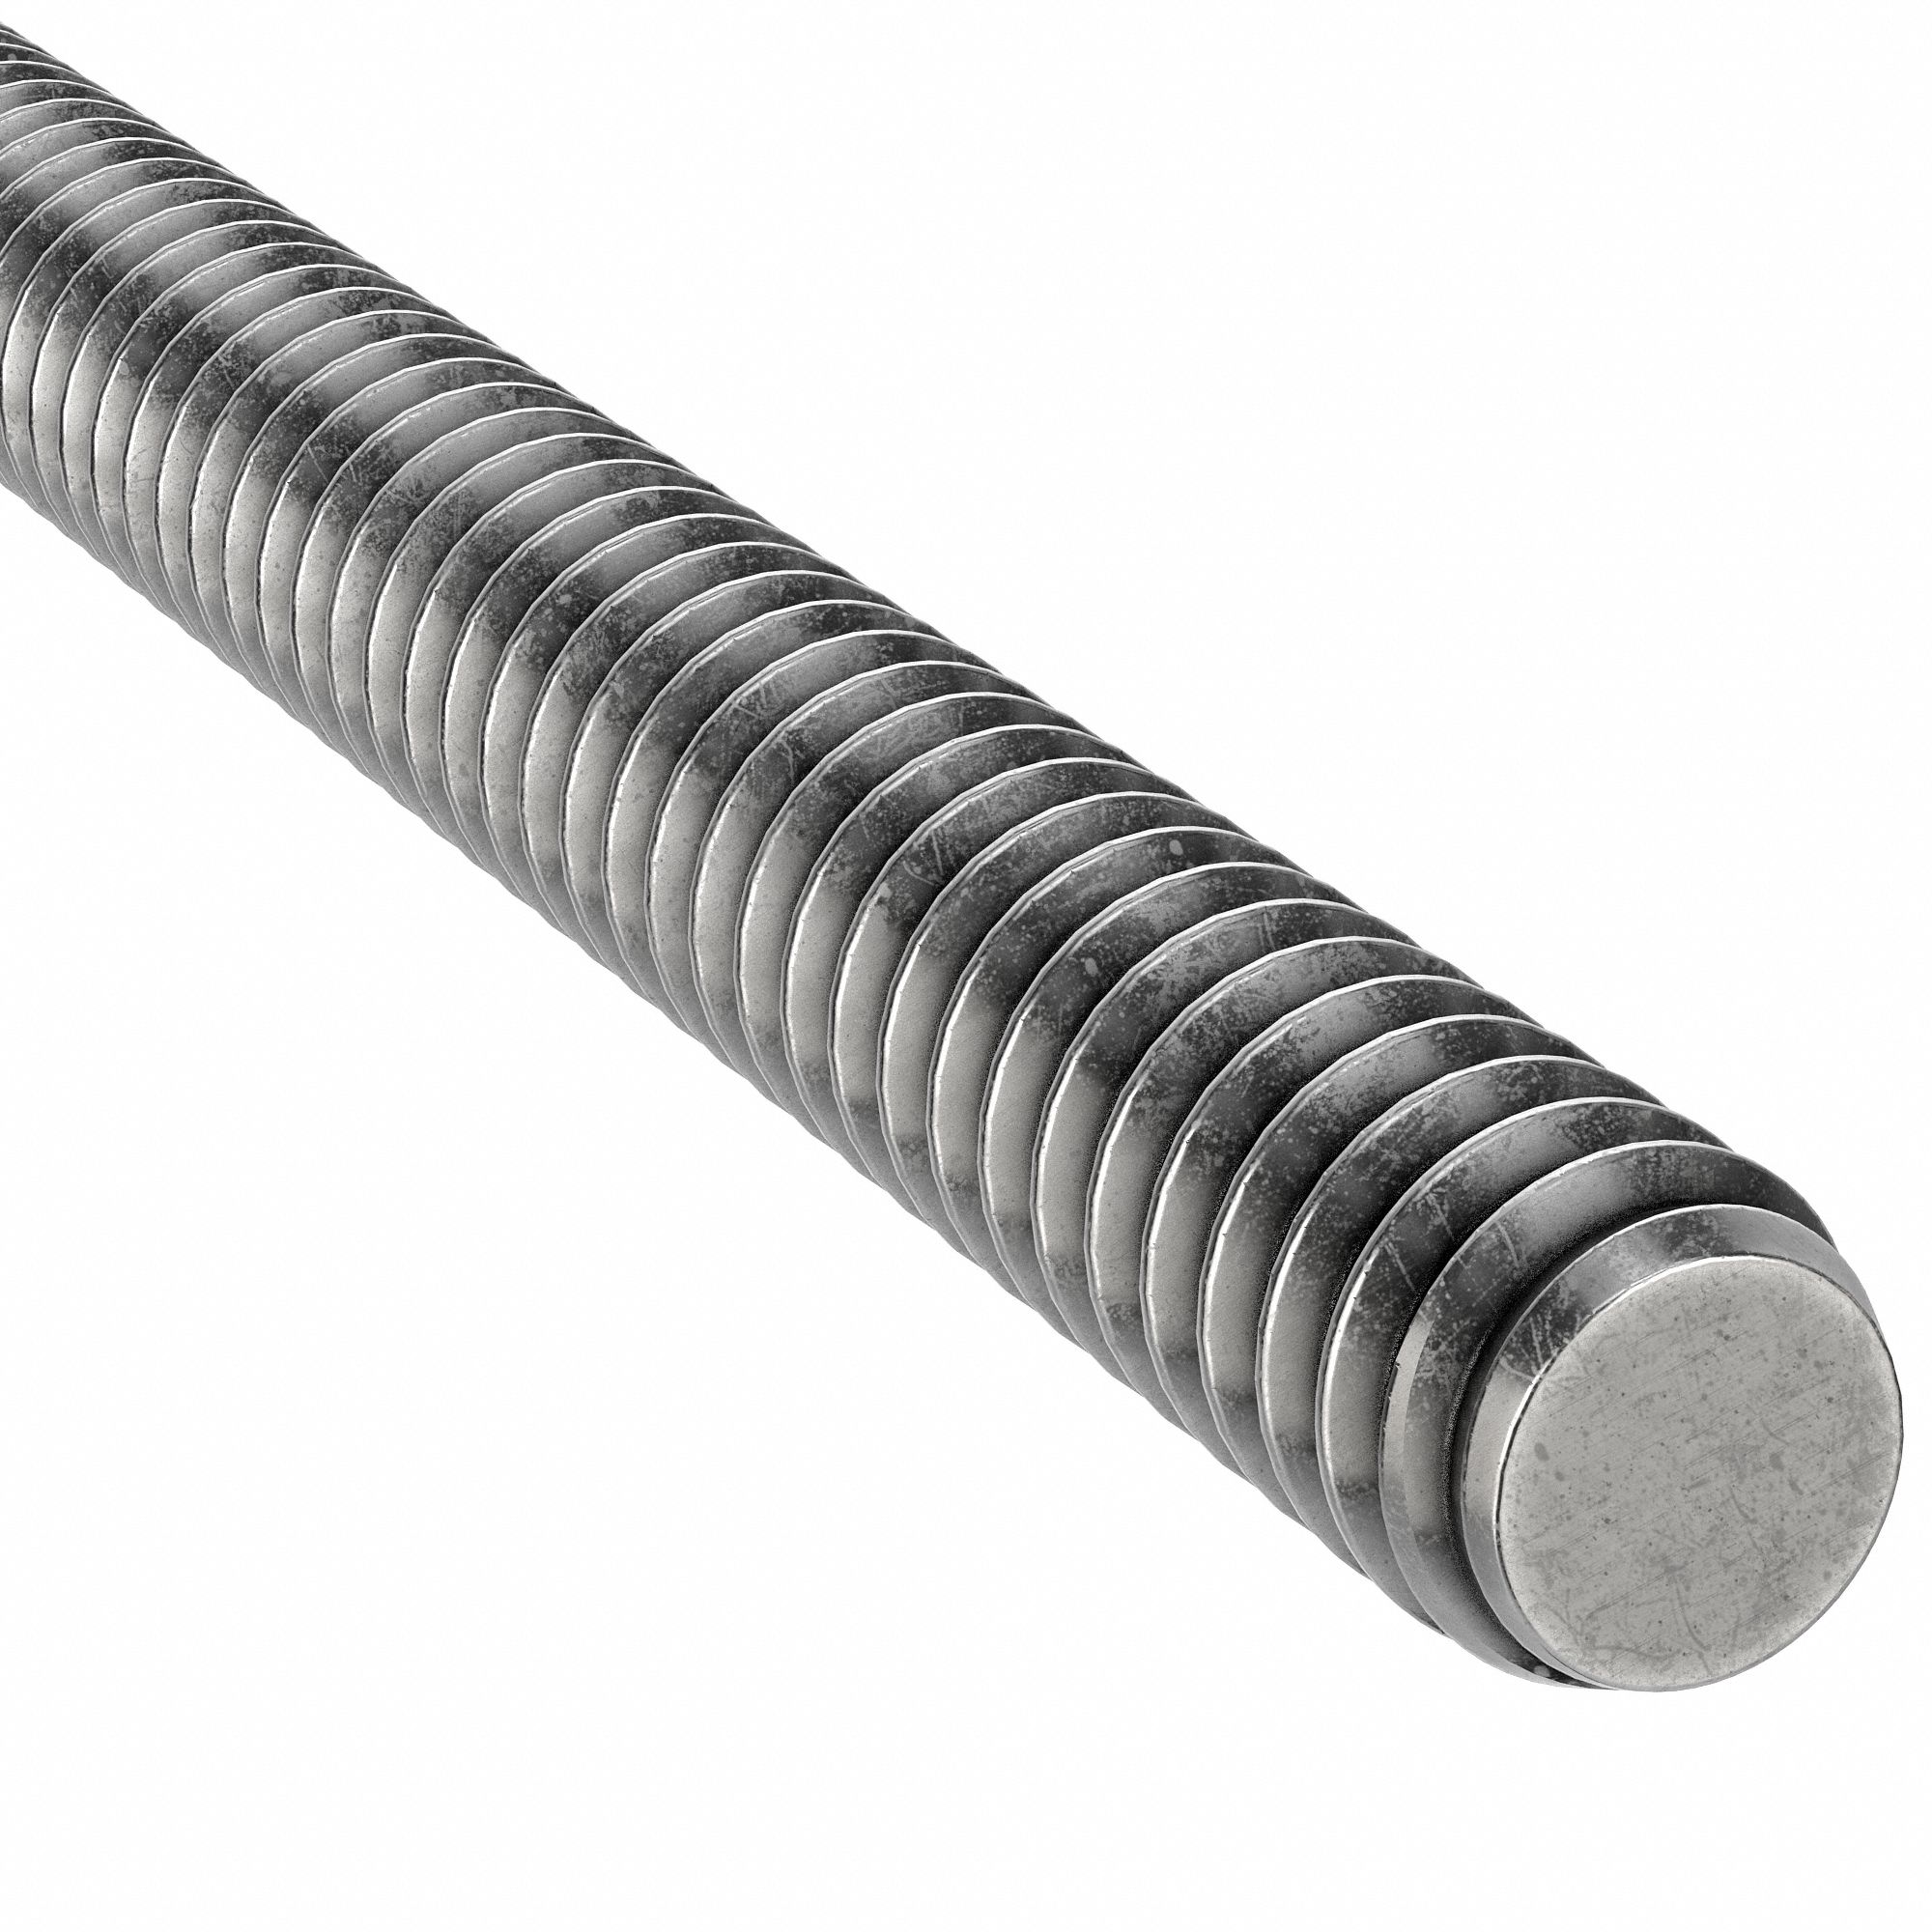 2BA Stainless Steel Threaded Bar x 16 Inches Long All Thread Studding  1 Item 